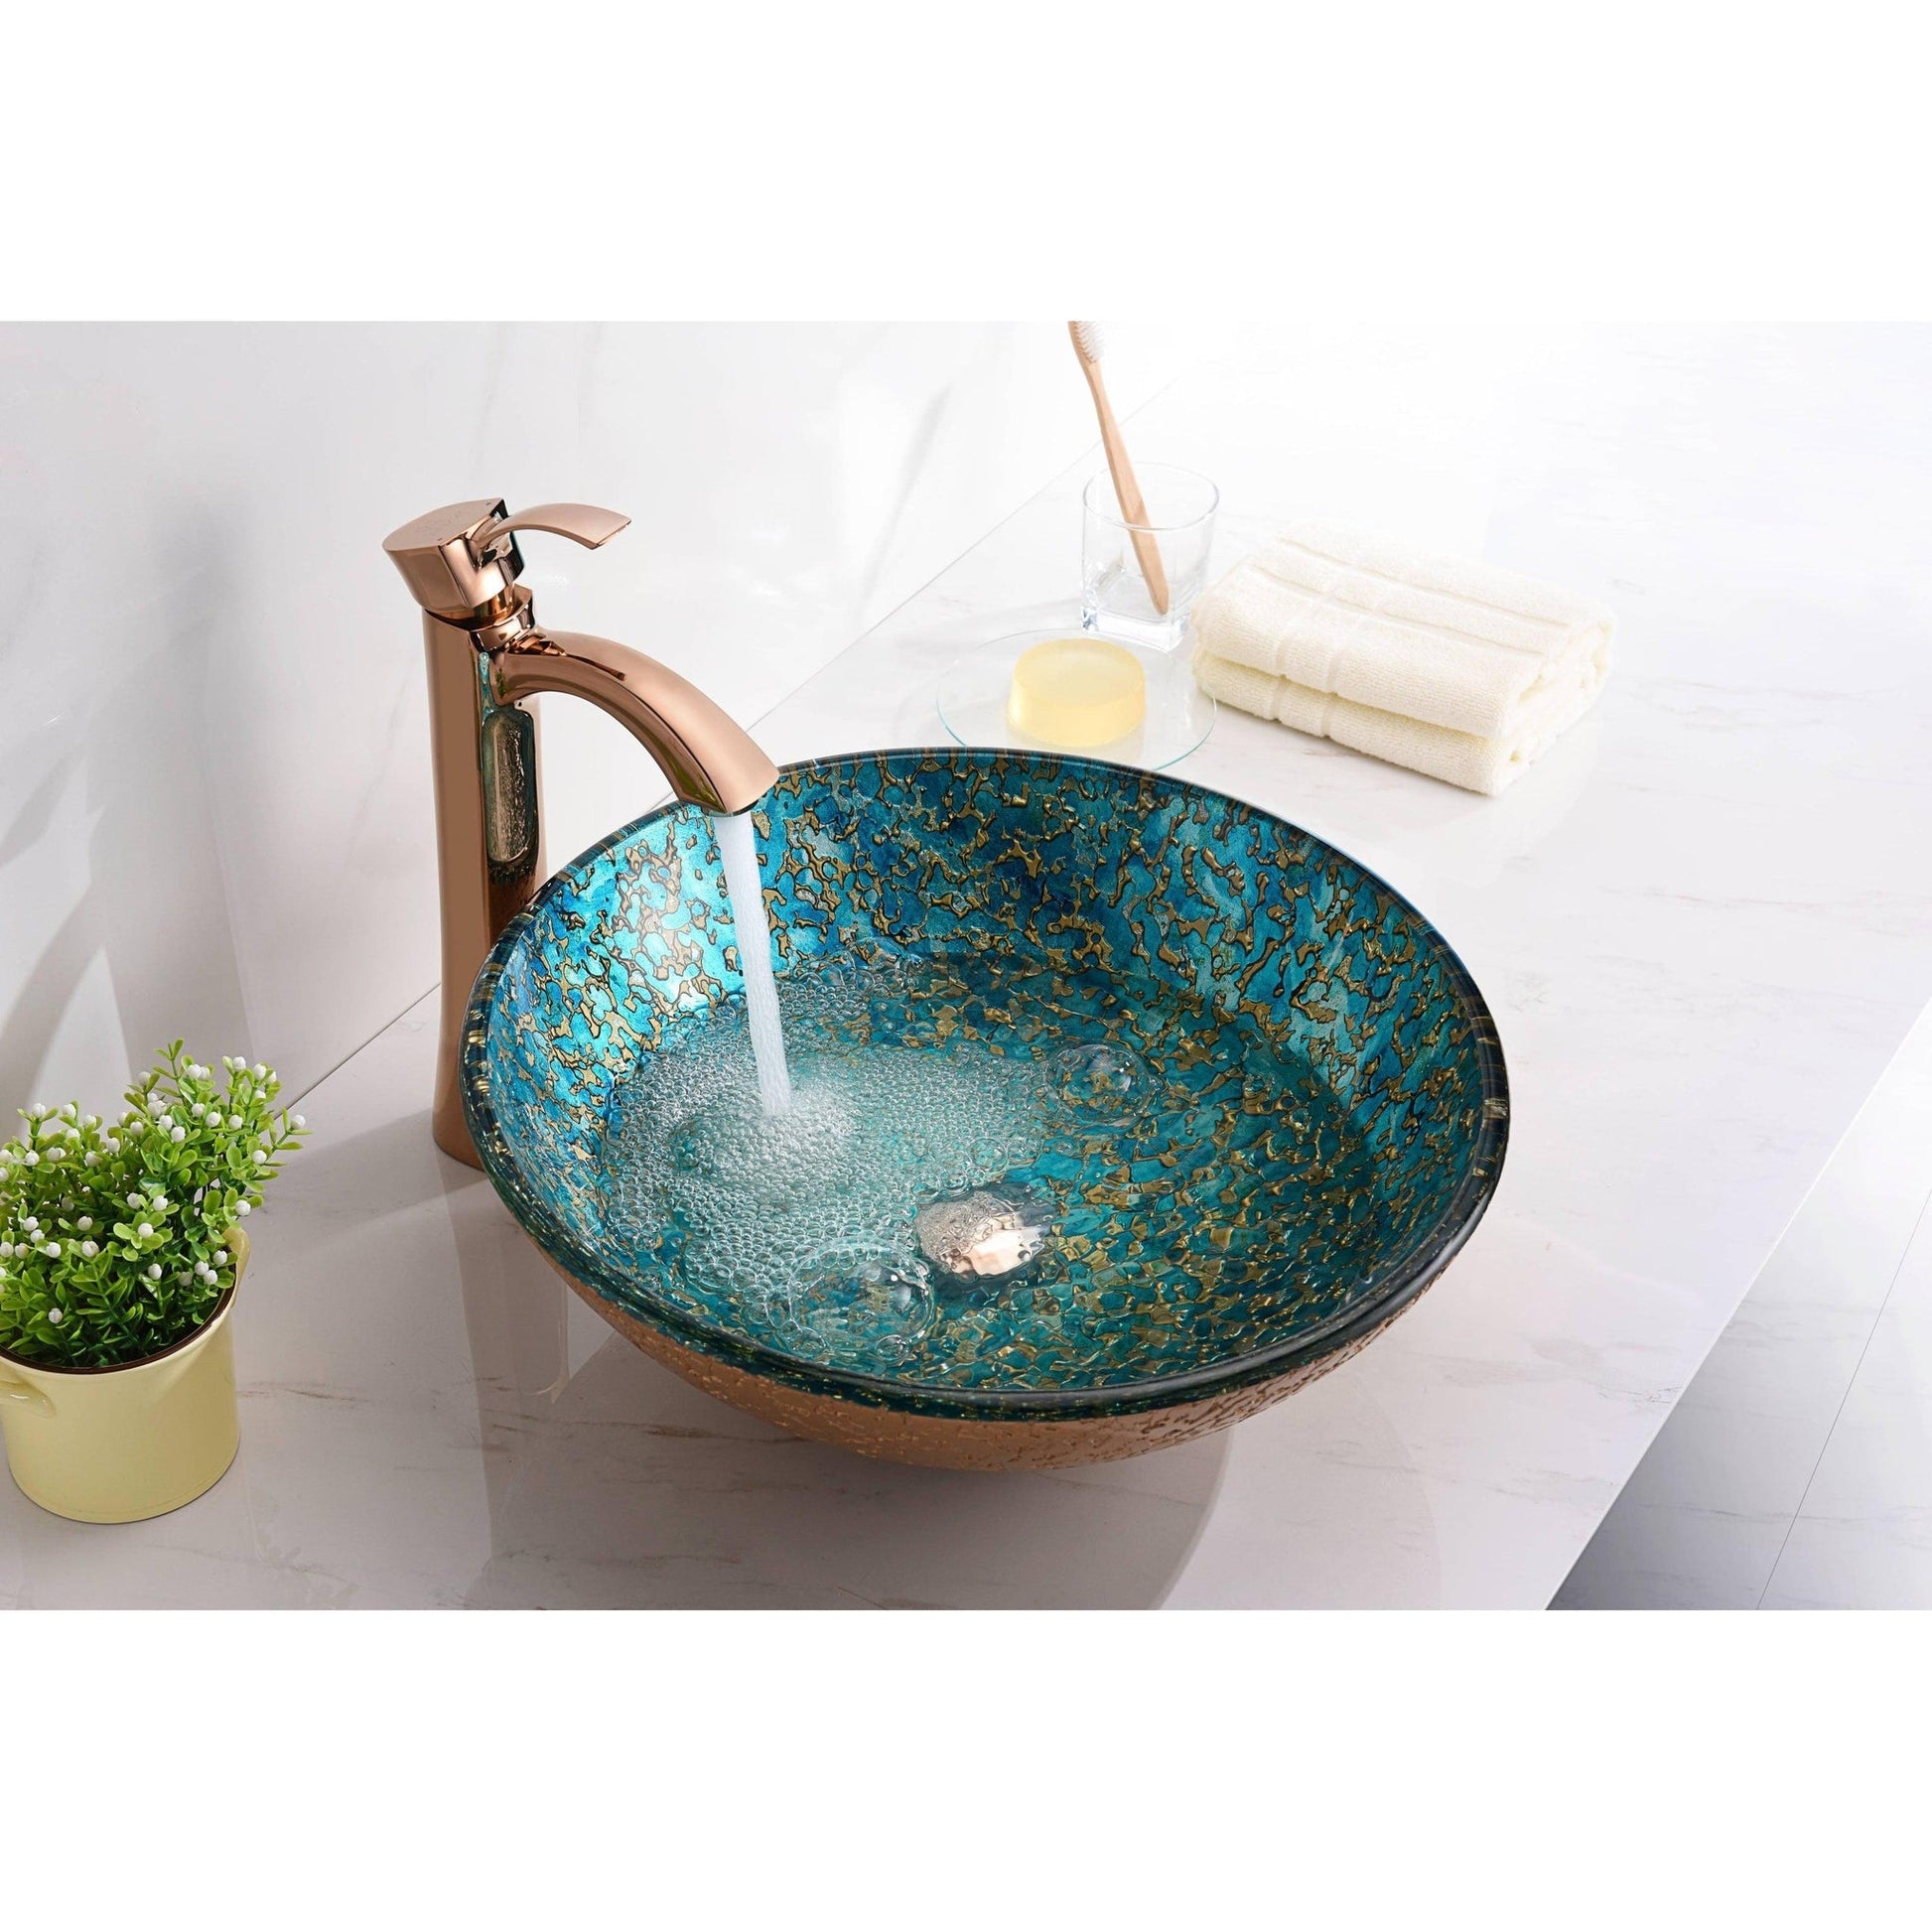 ANZZI Makata Series 17" x 17" Round Gold and Cyan Deco-Glass Vessel Sink With Polished Chrome Pop-Up Drain